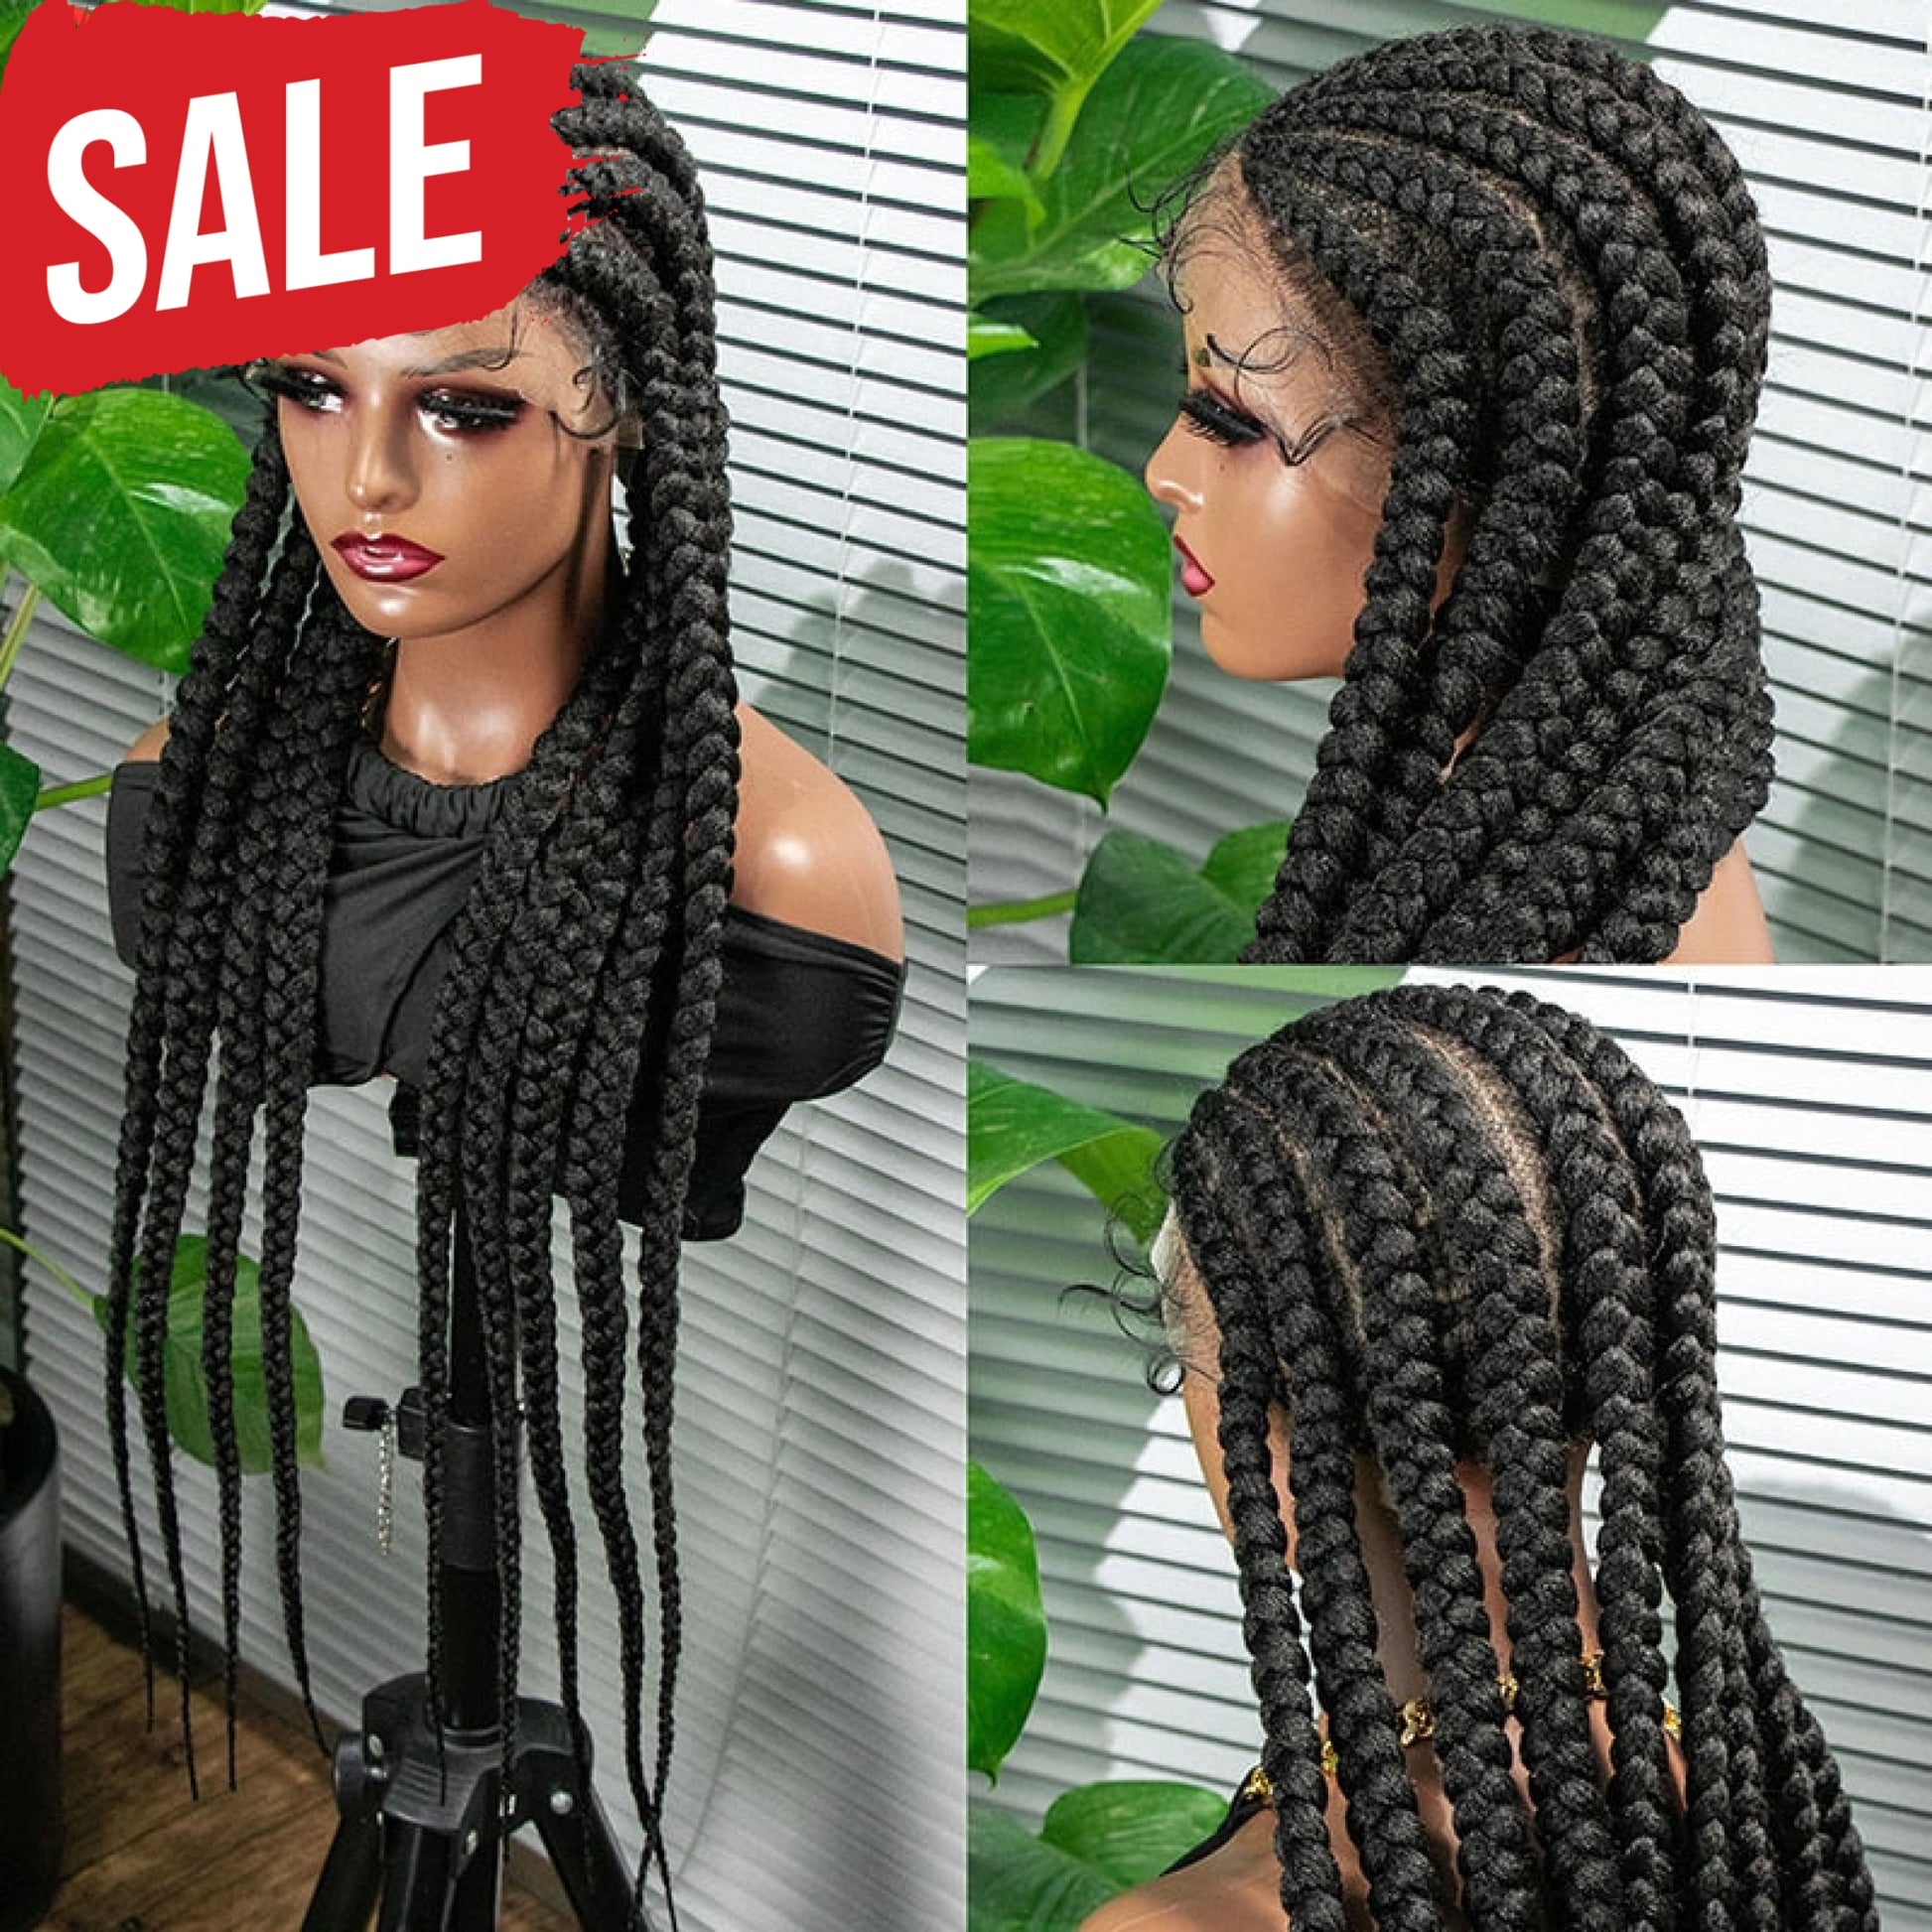 Full Lace Front Synthetic Braid Wigs Full Lace Front Synthetic Braid Wigs Full Lace Front Synthetic Braid Wigs 